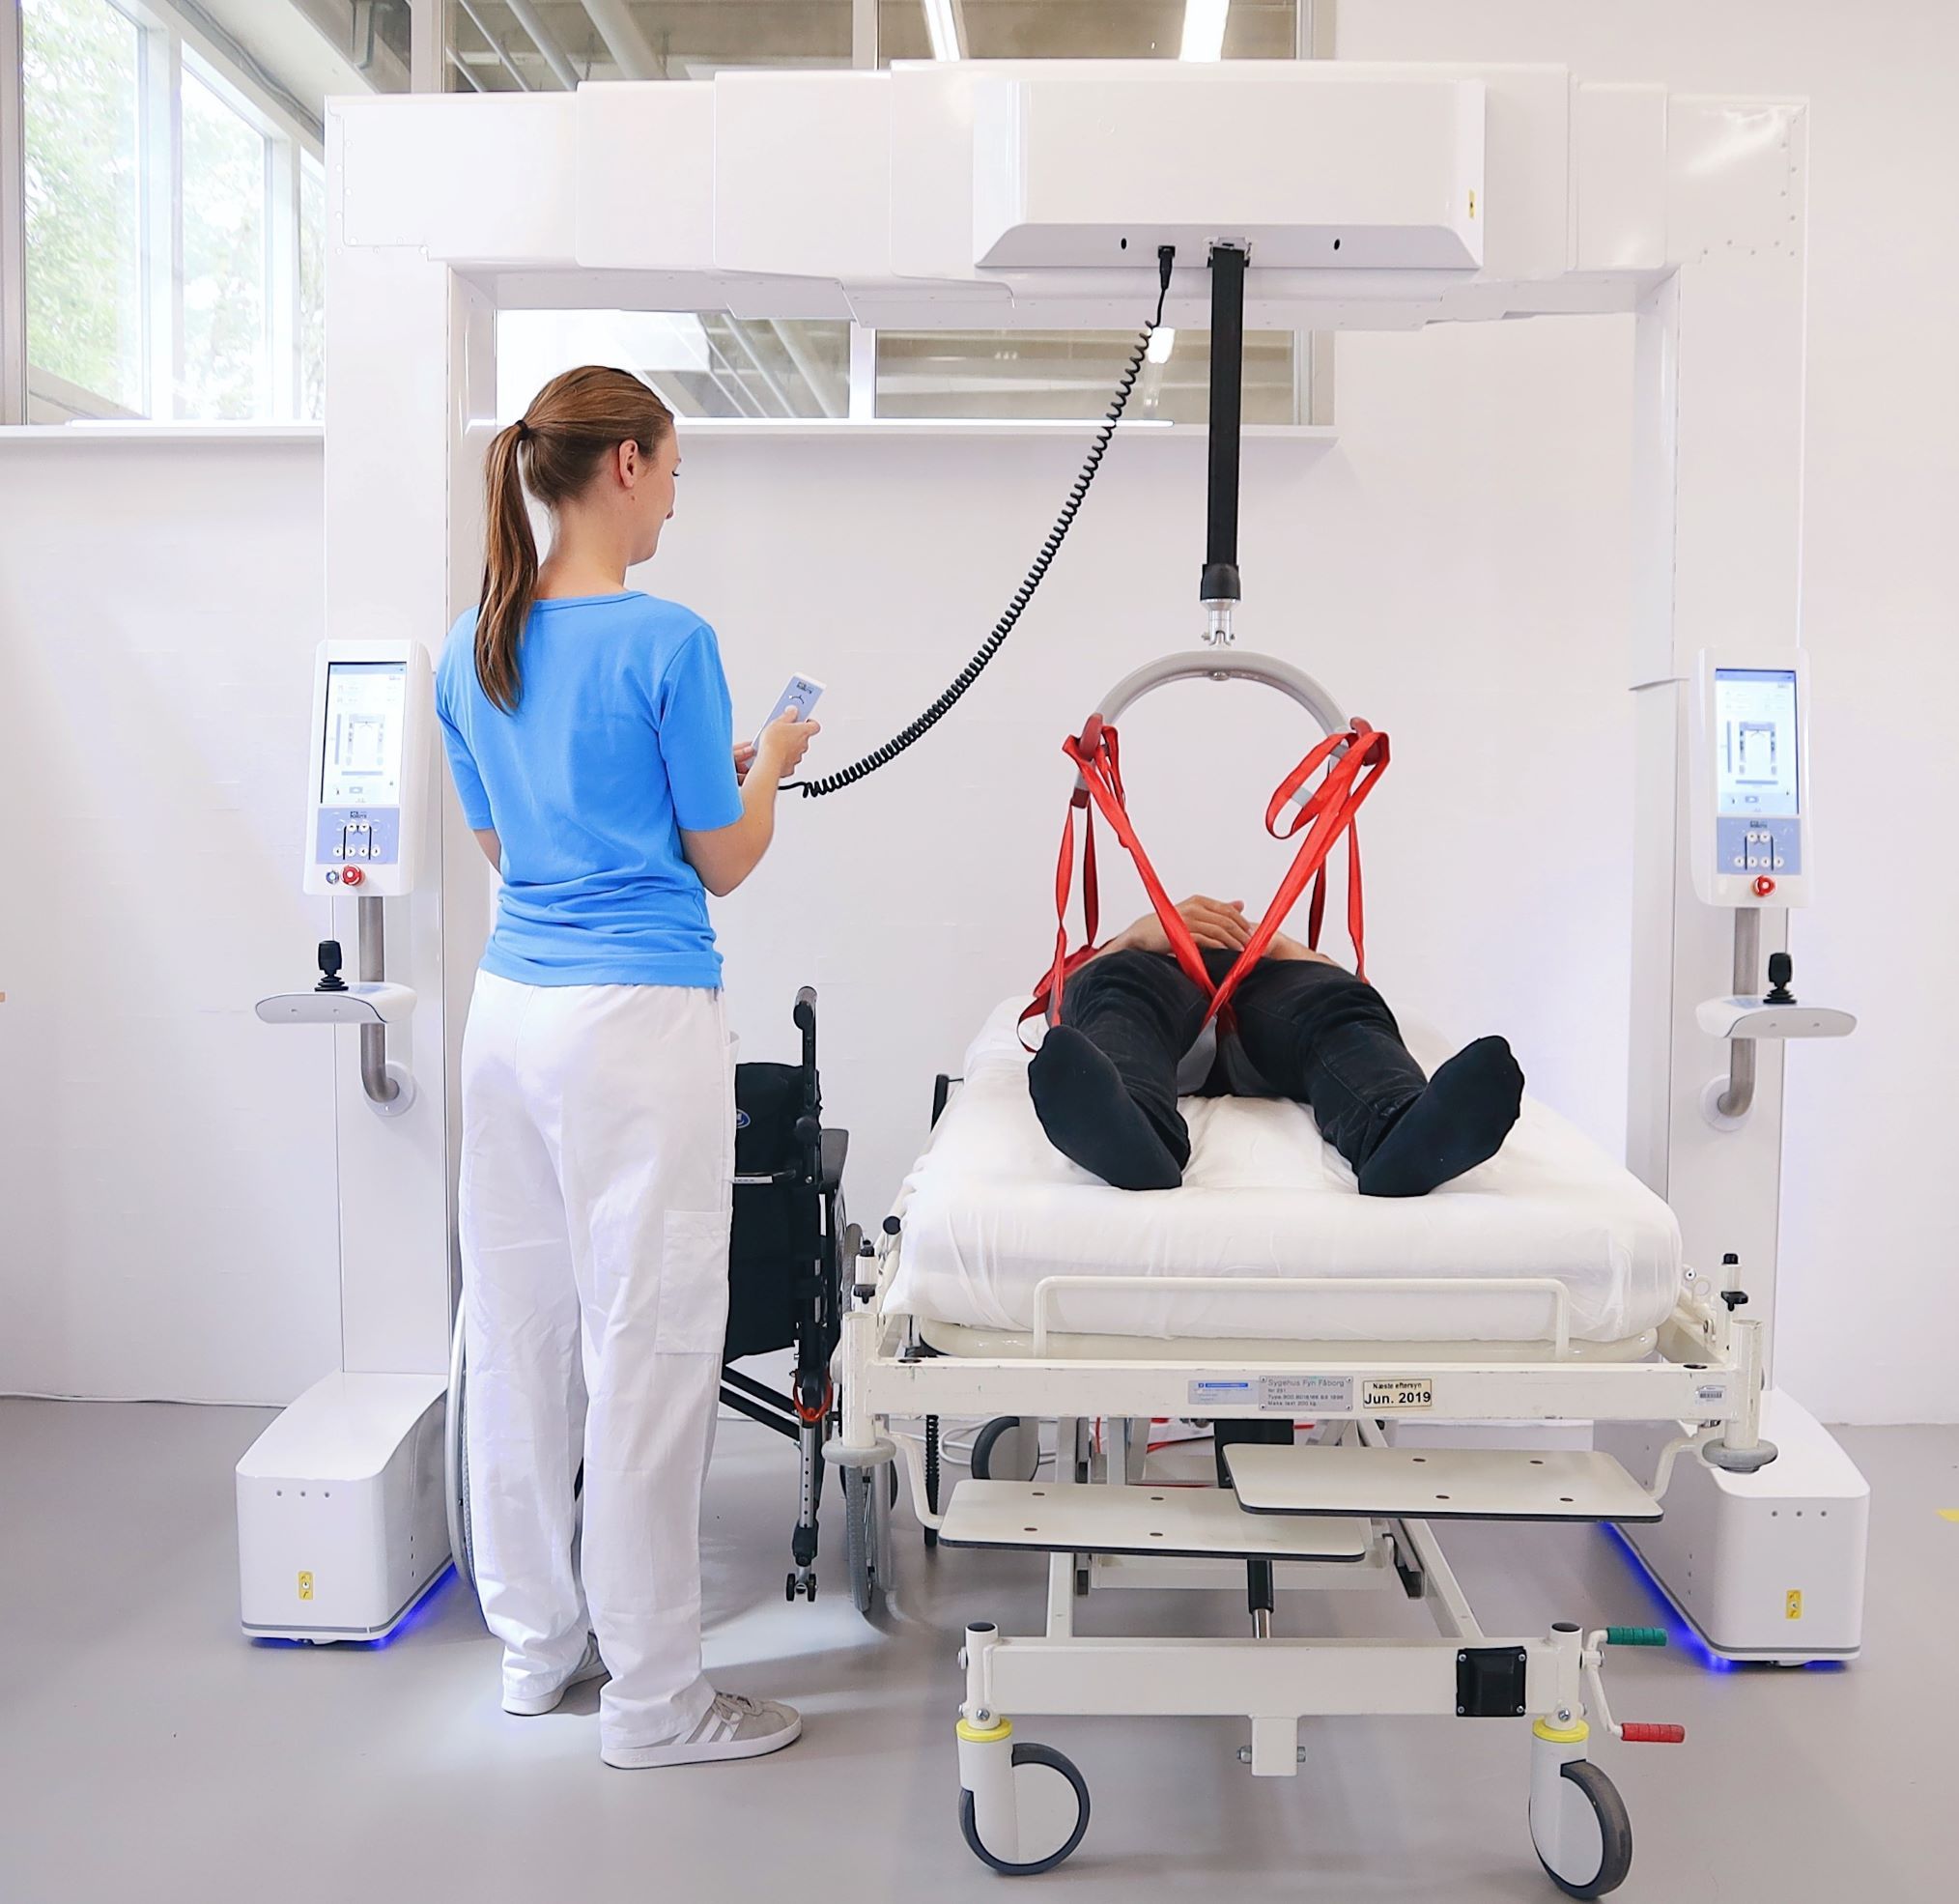 PTR Robots Introduces World's First Mobile Lifting Robot That Both Transfers and Patients | Business Wire